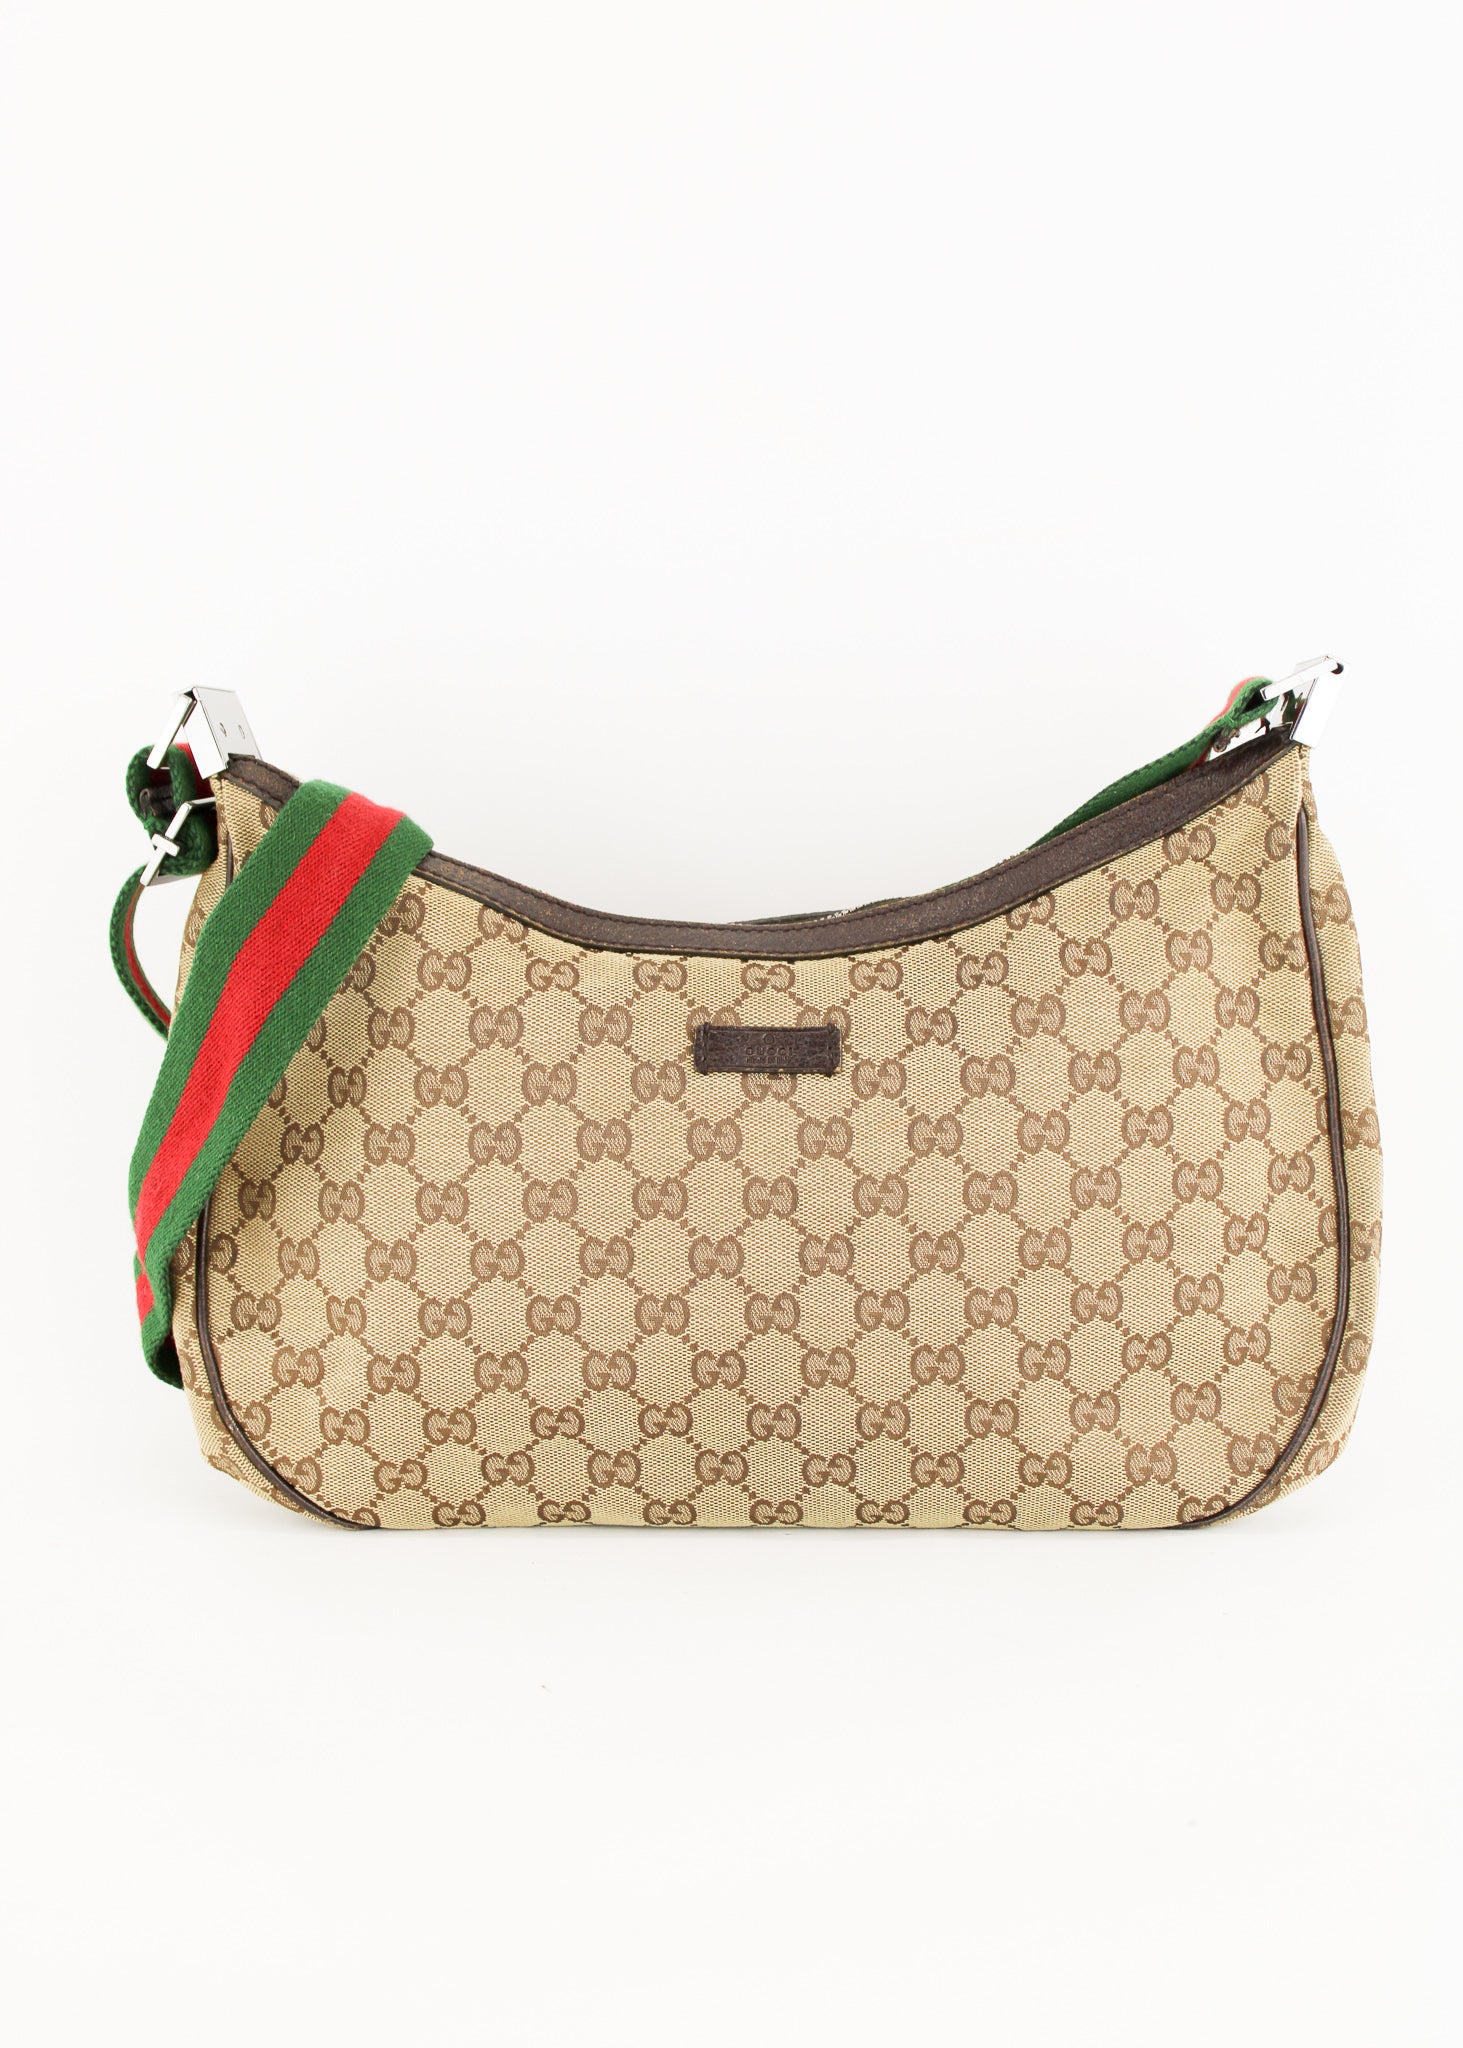 Authentic GUCCI Shoulder Cross Body Bag GG Canvas Leather 122790